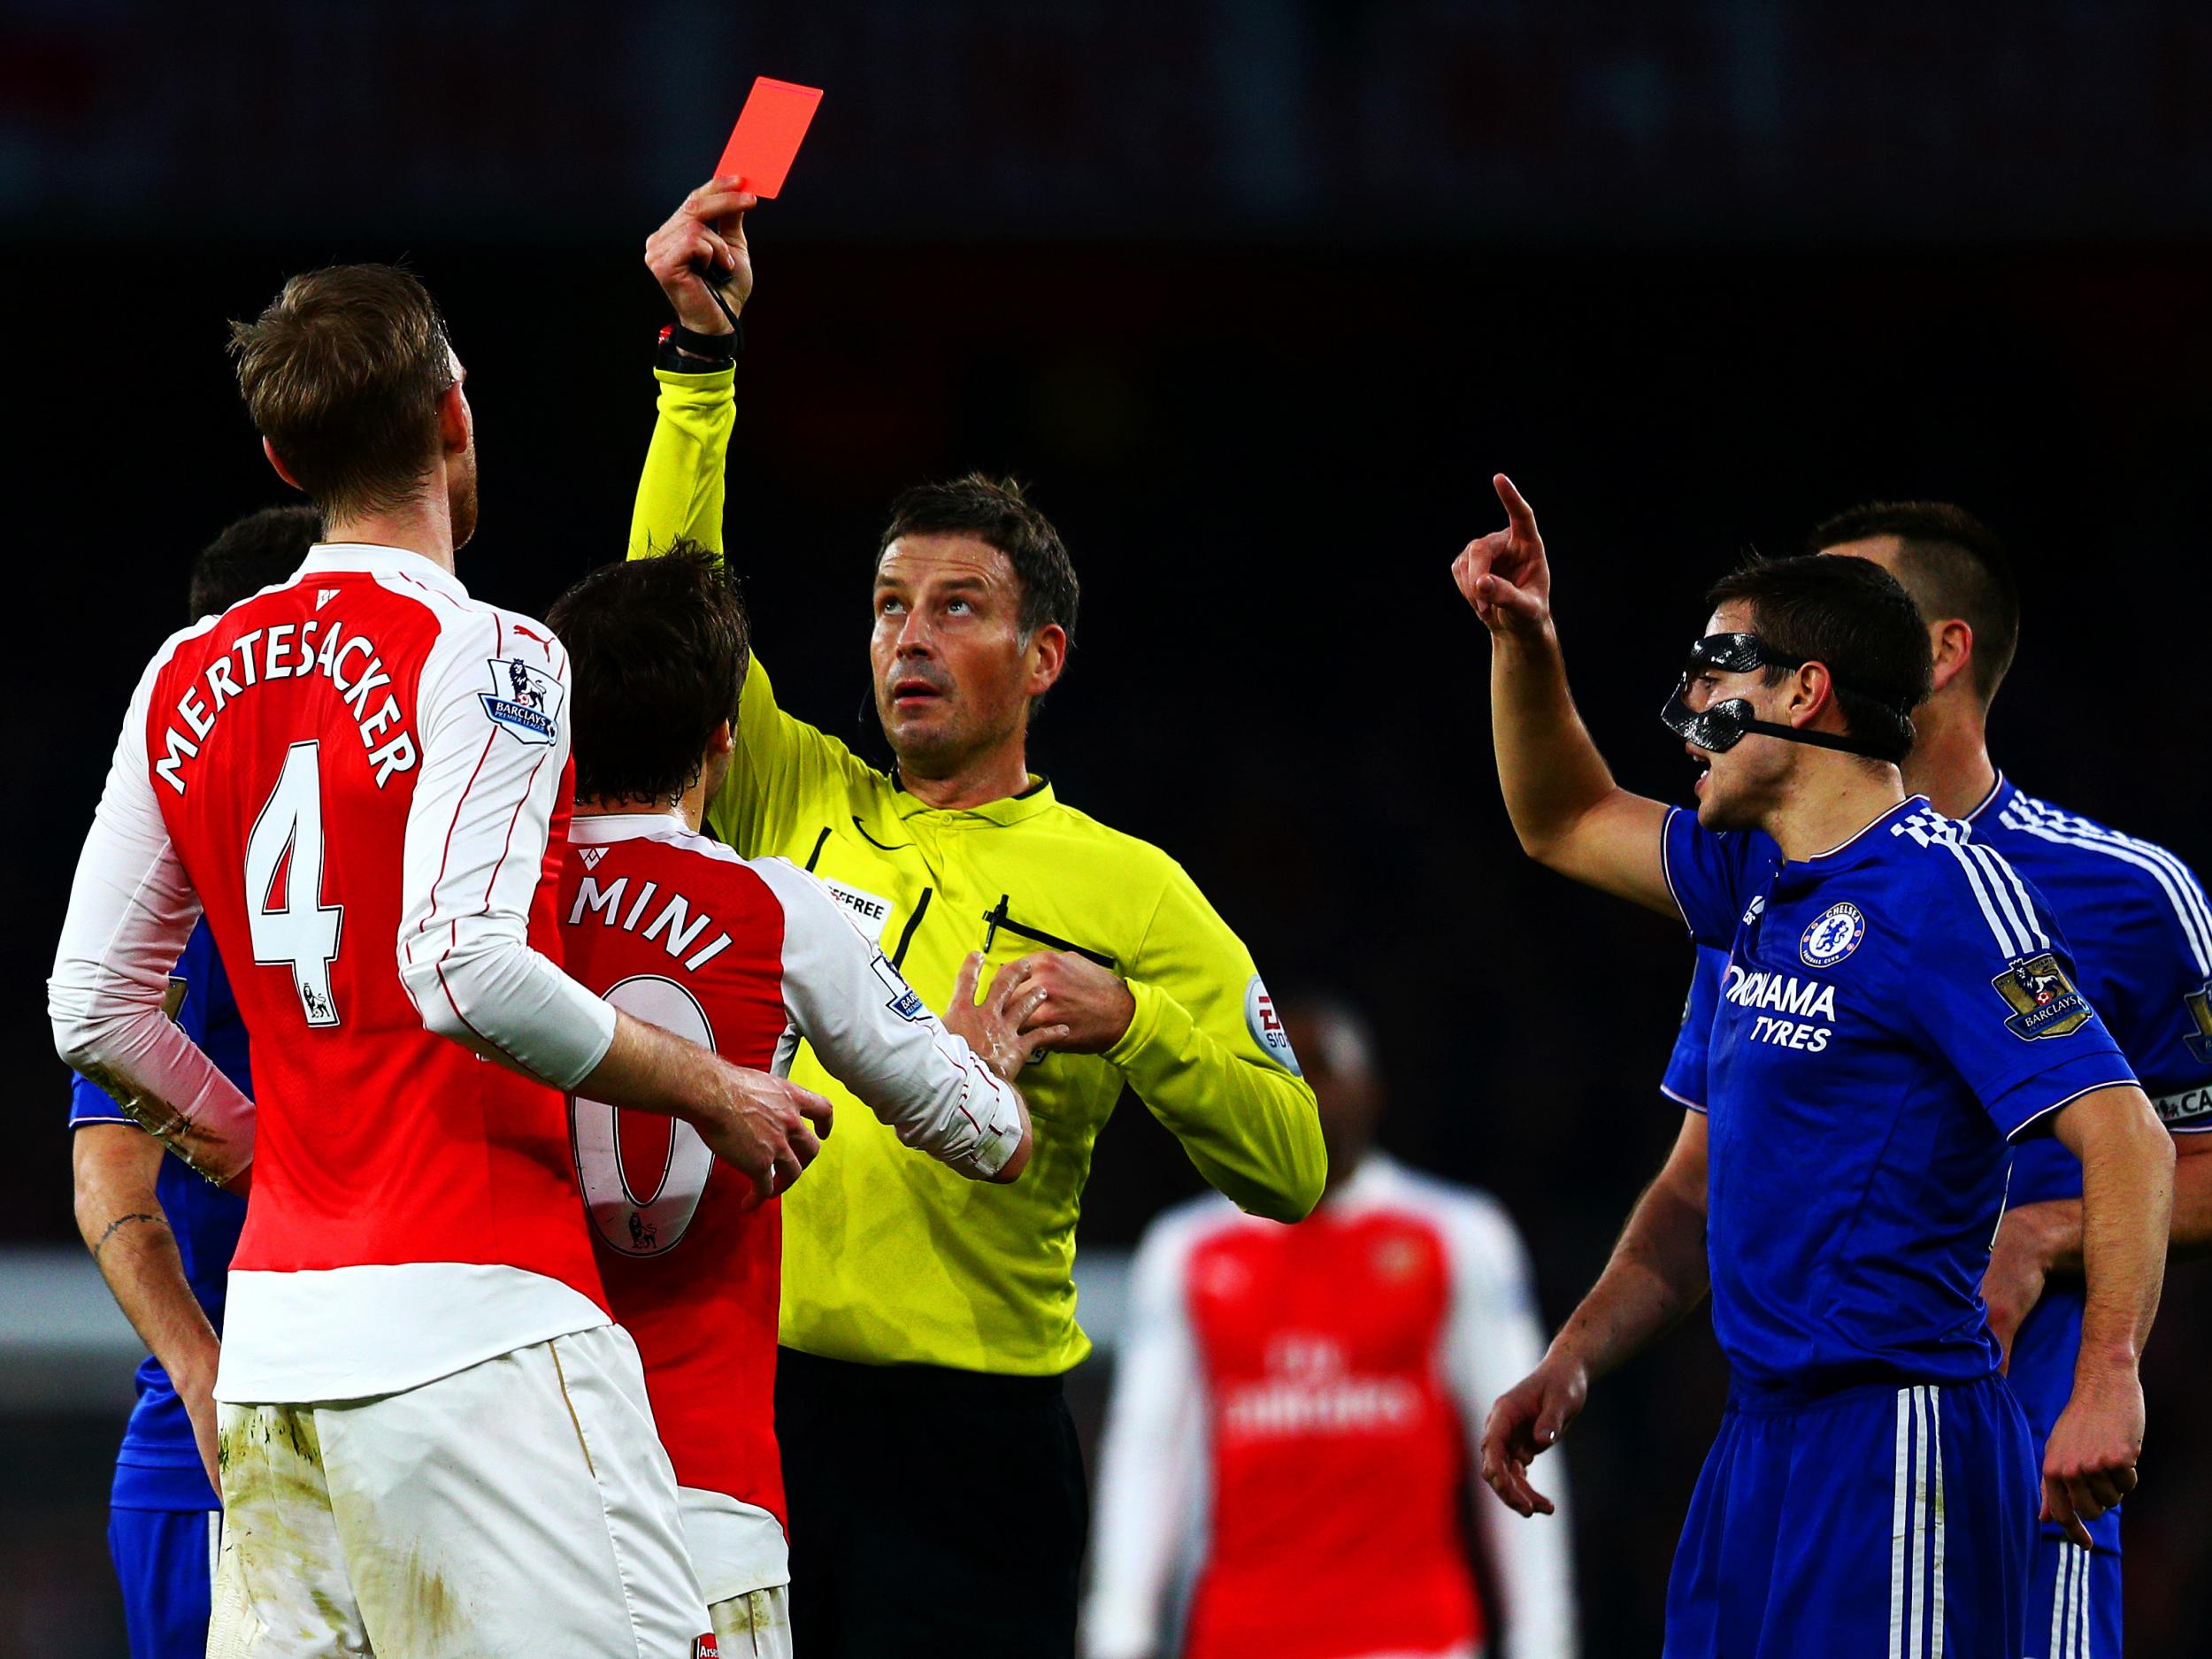 Per Mertesacker is given a rec card against Chelsea